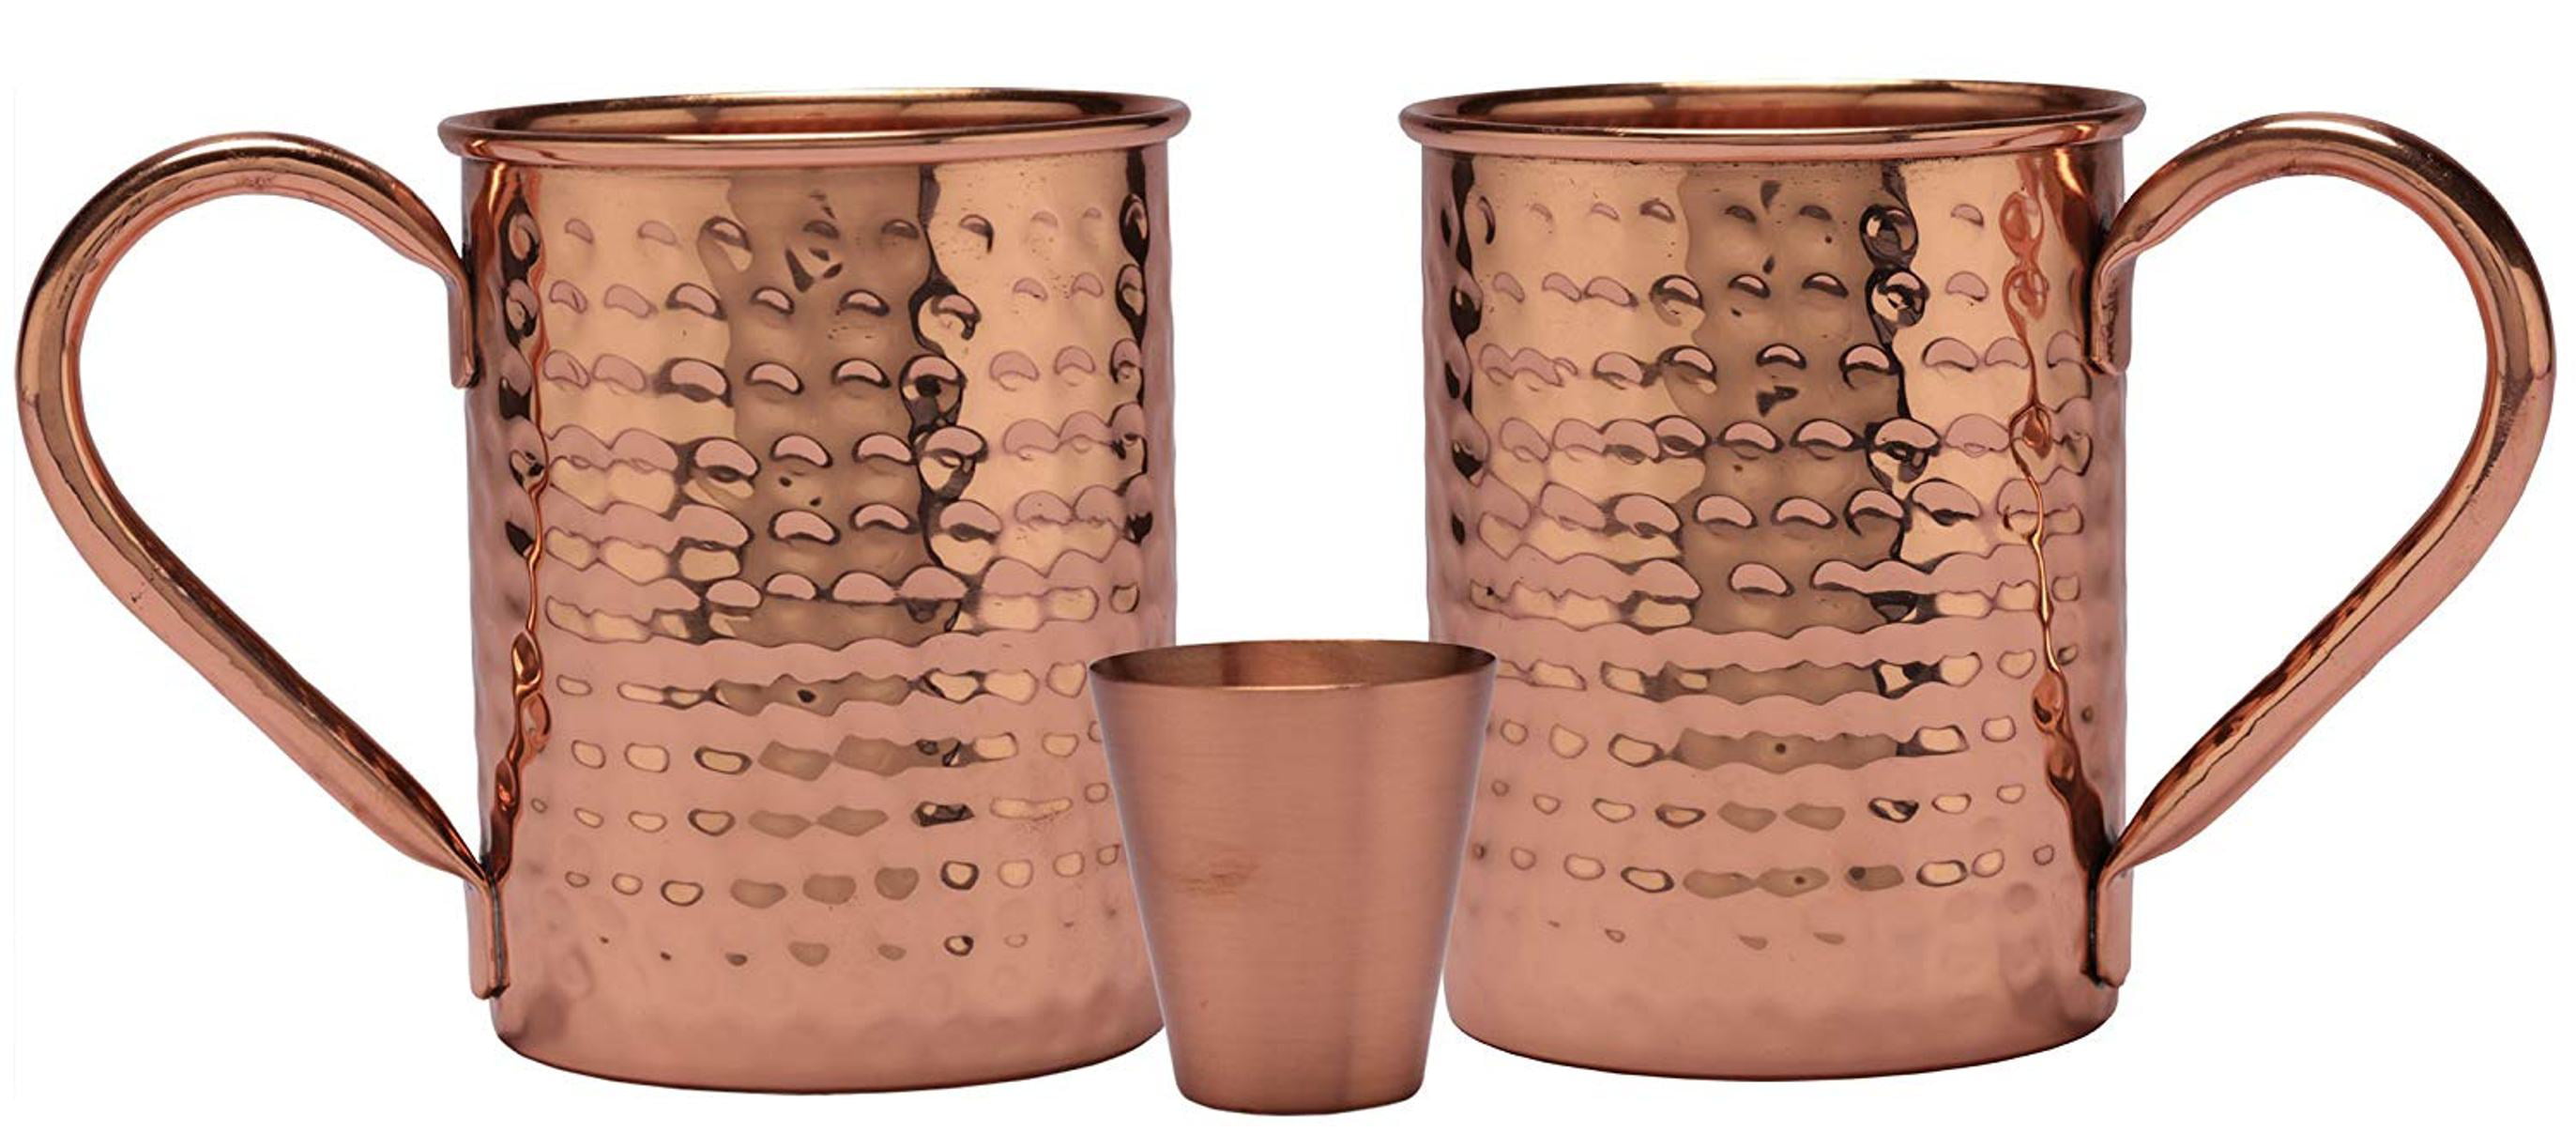 Melange 24 Oz Copper Classic Mug for Moscow Mules Set of 2 with One Shot Glass Includes Free Recipe Card No Lining Heavy Gauge 